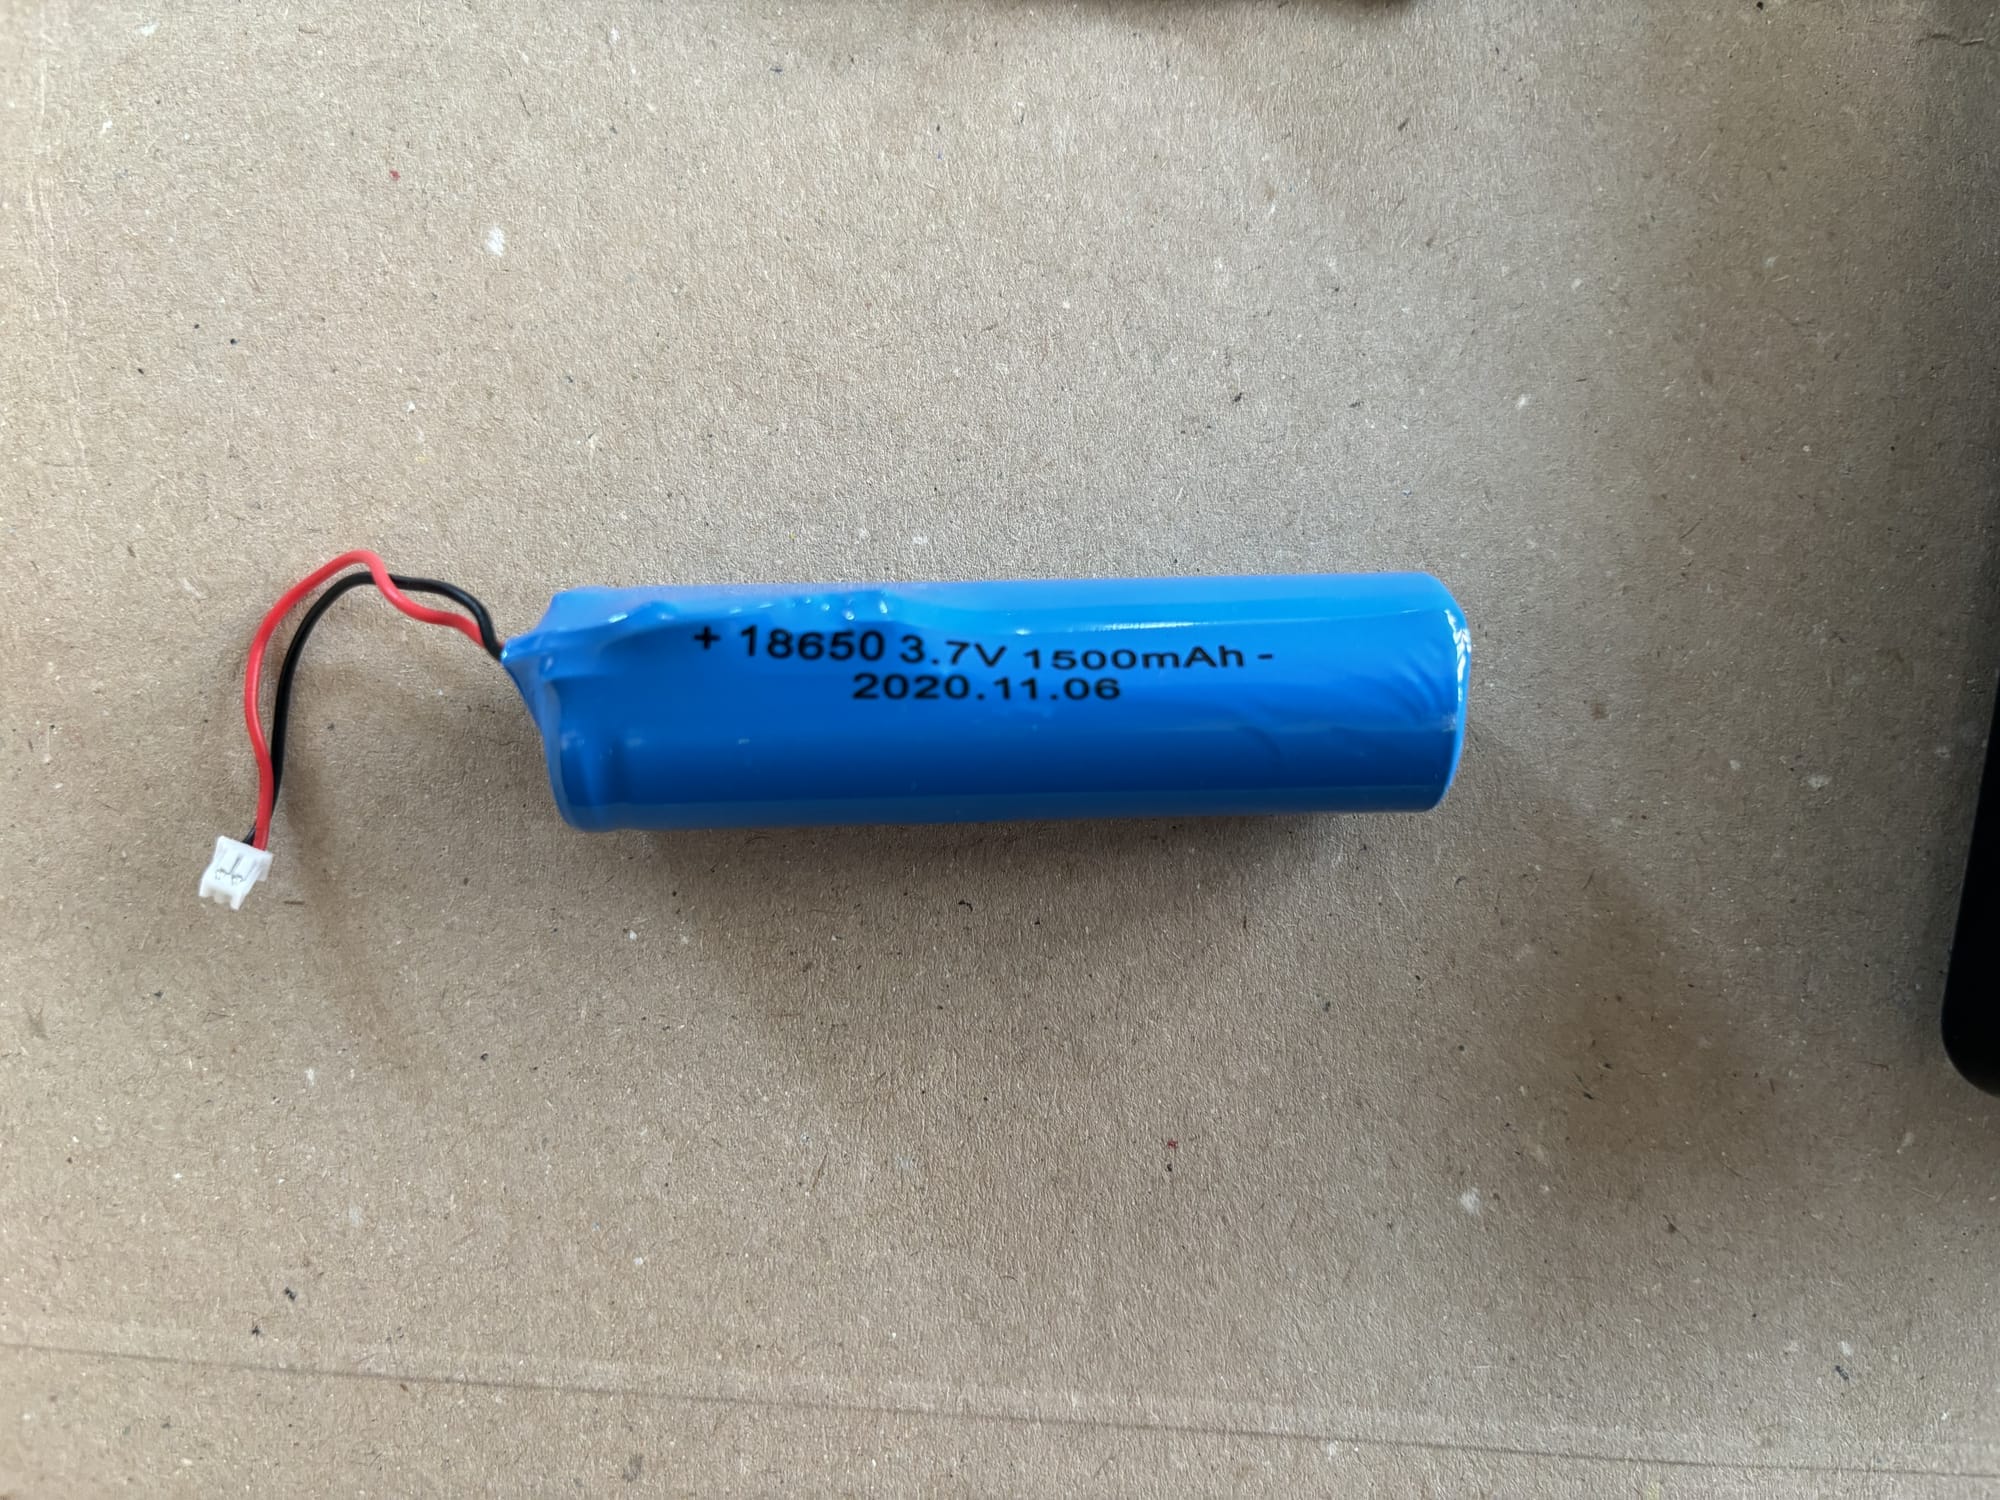 The 18650 battery extracted from the second board in the barcode scanner.